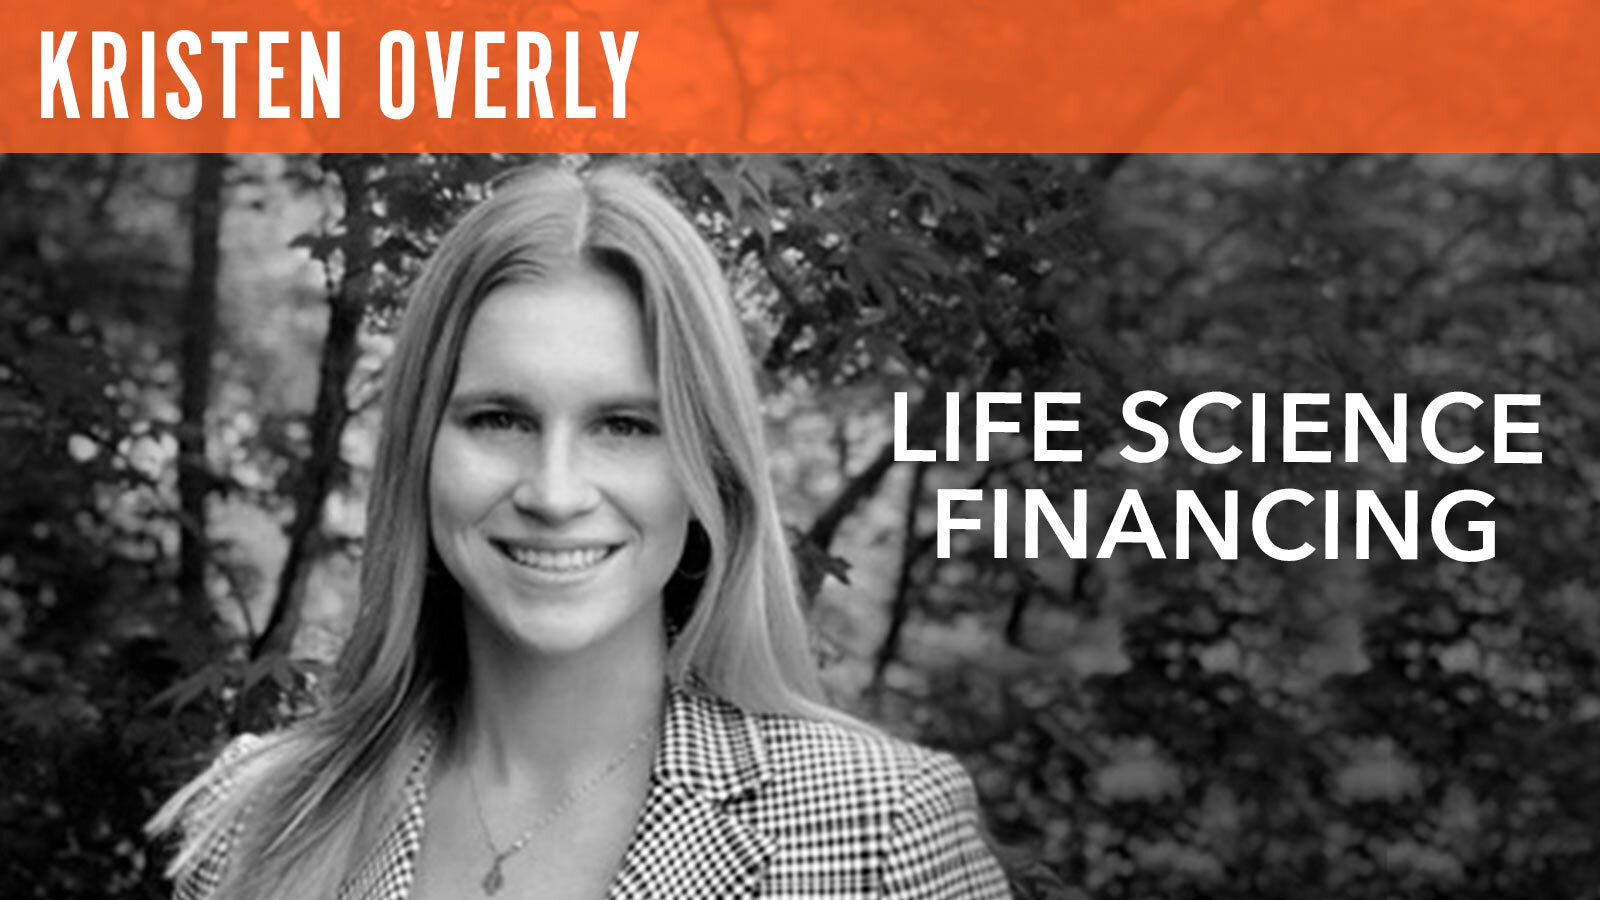 Kristen Overly, "Life Science Financing"